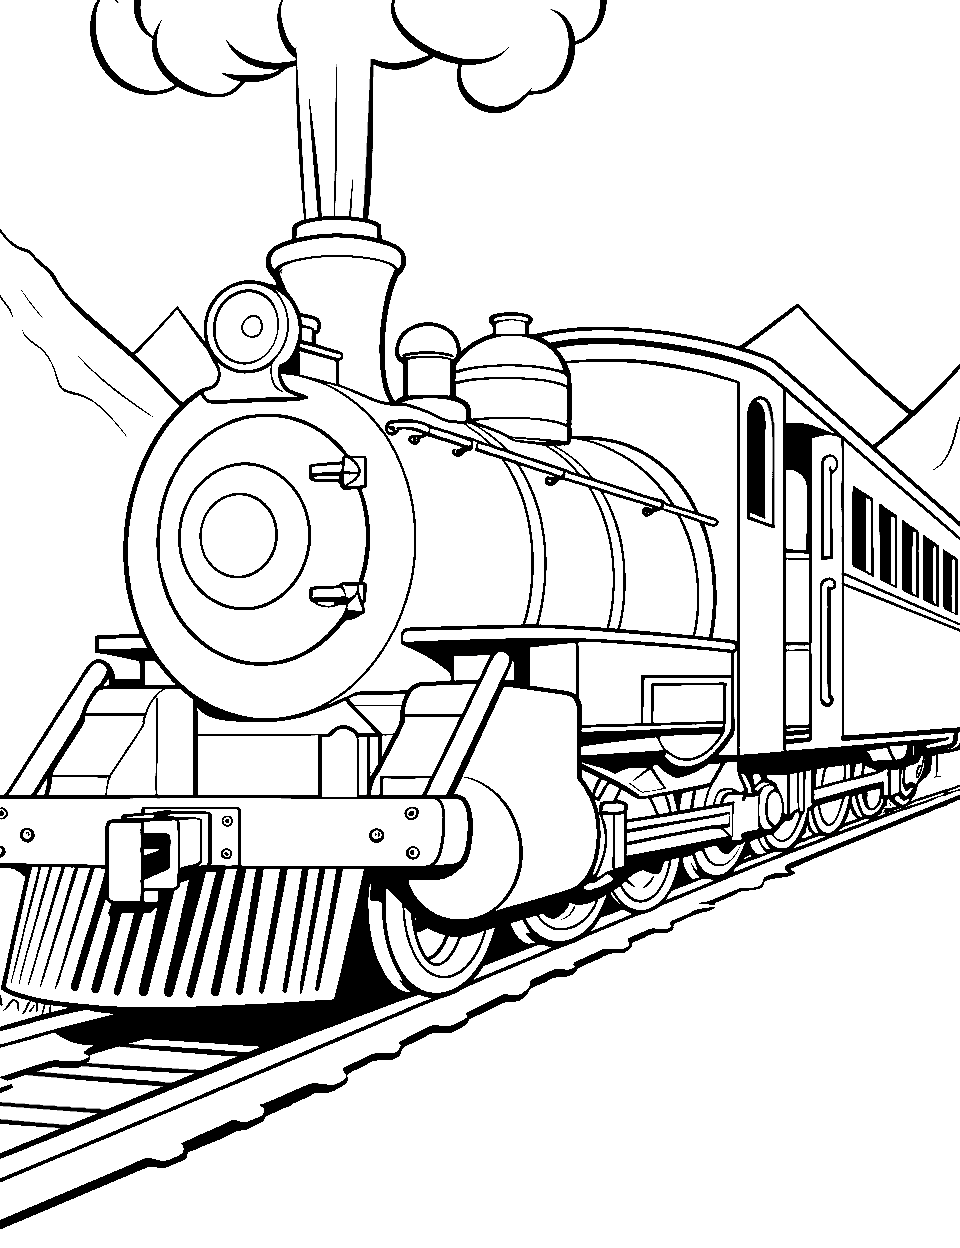 Choo Train in the Mountains Coloring Page - An old-fashioned steam train chugging through the mountains.